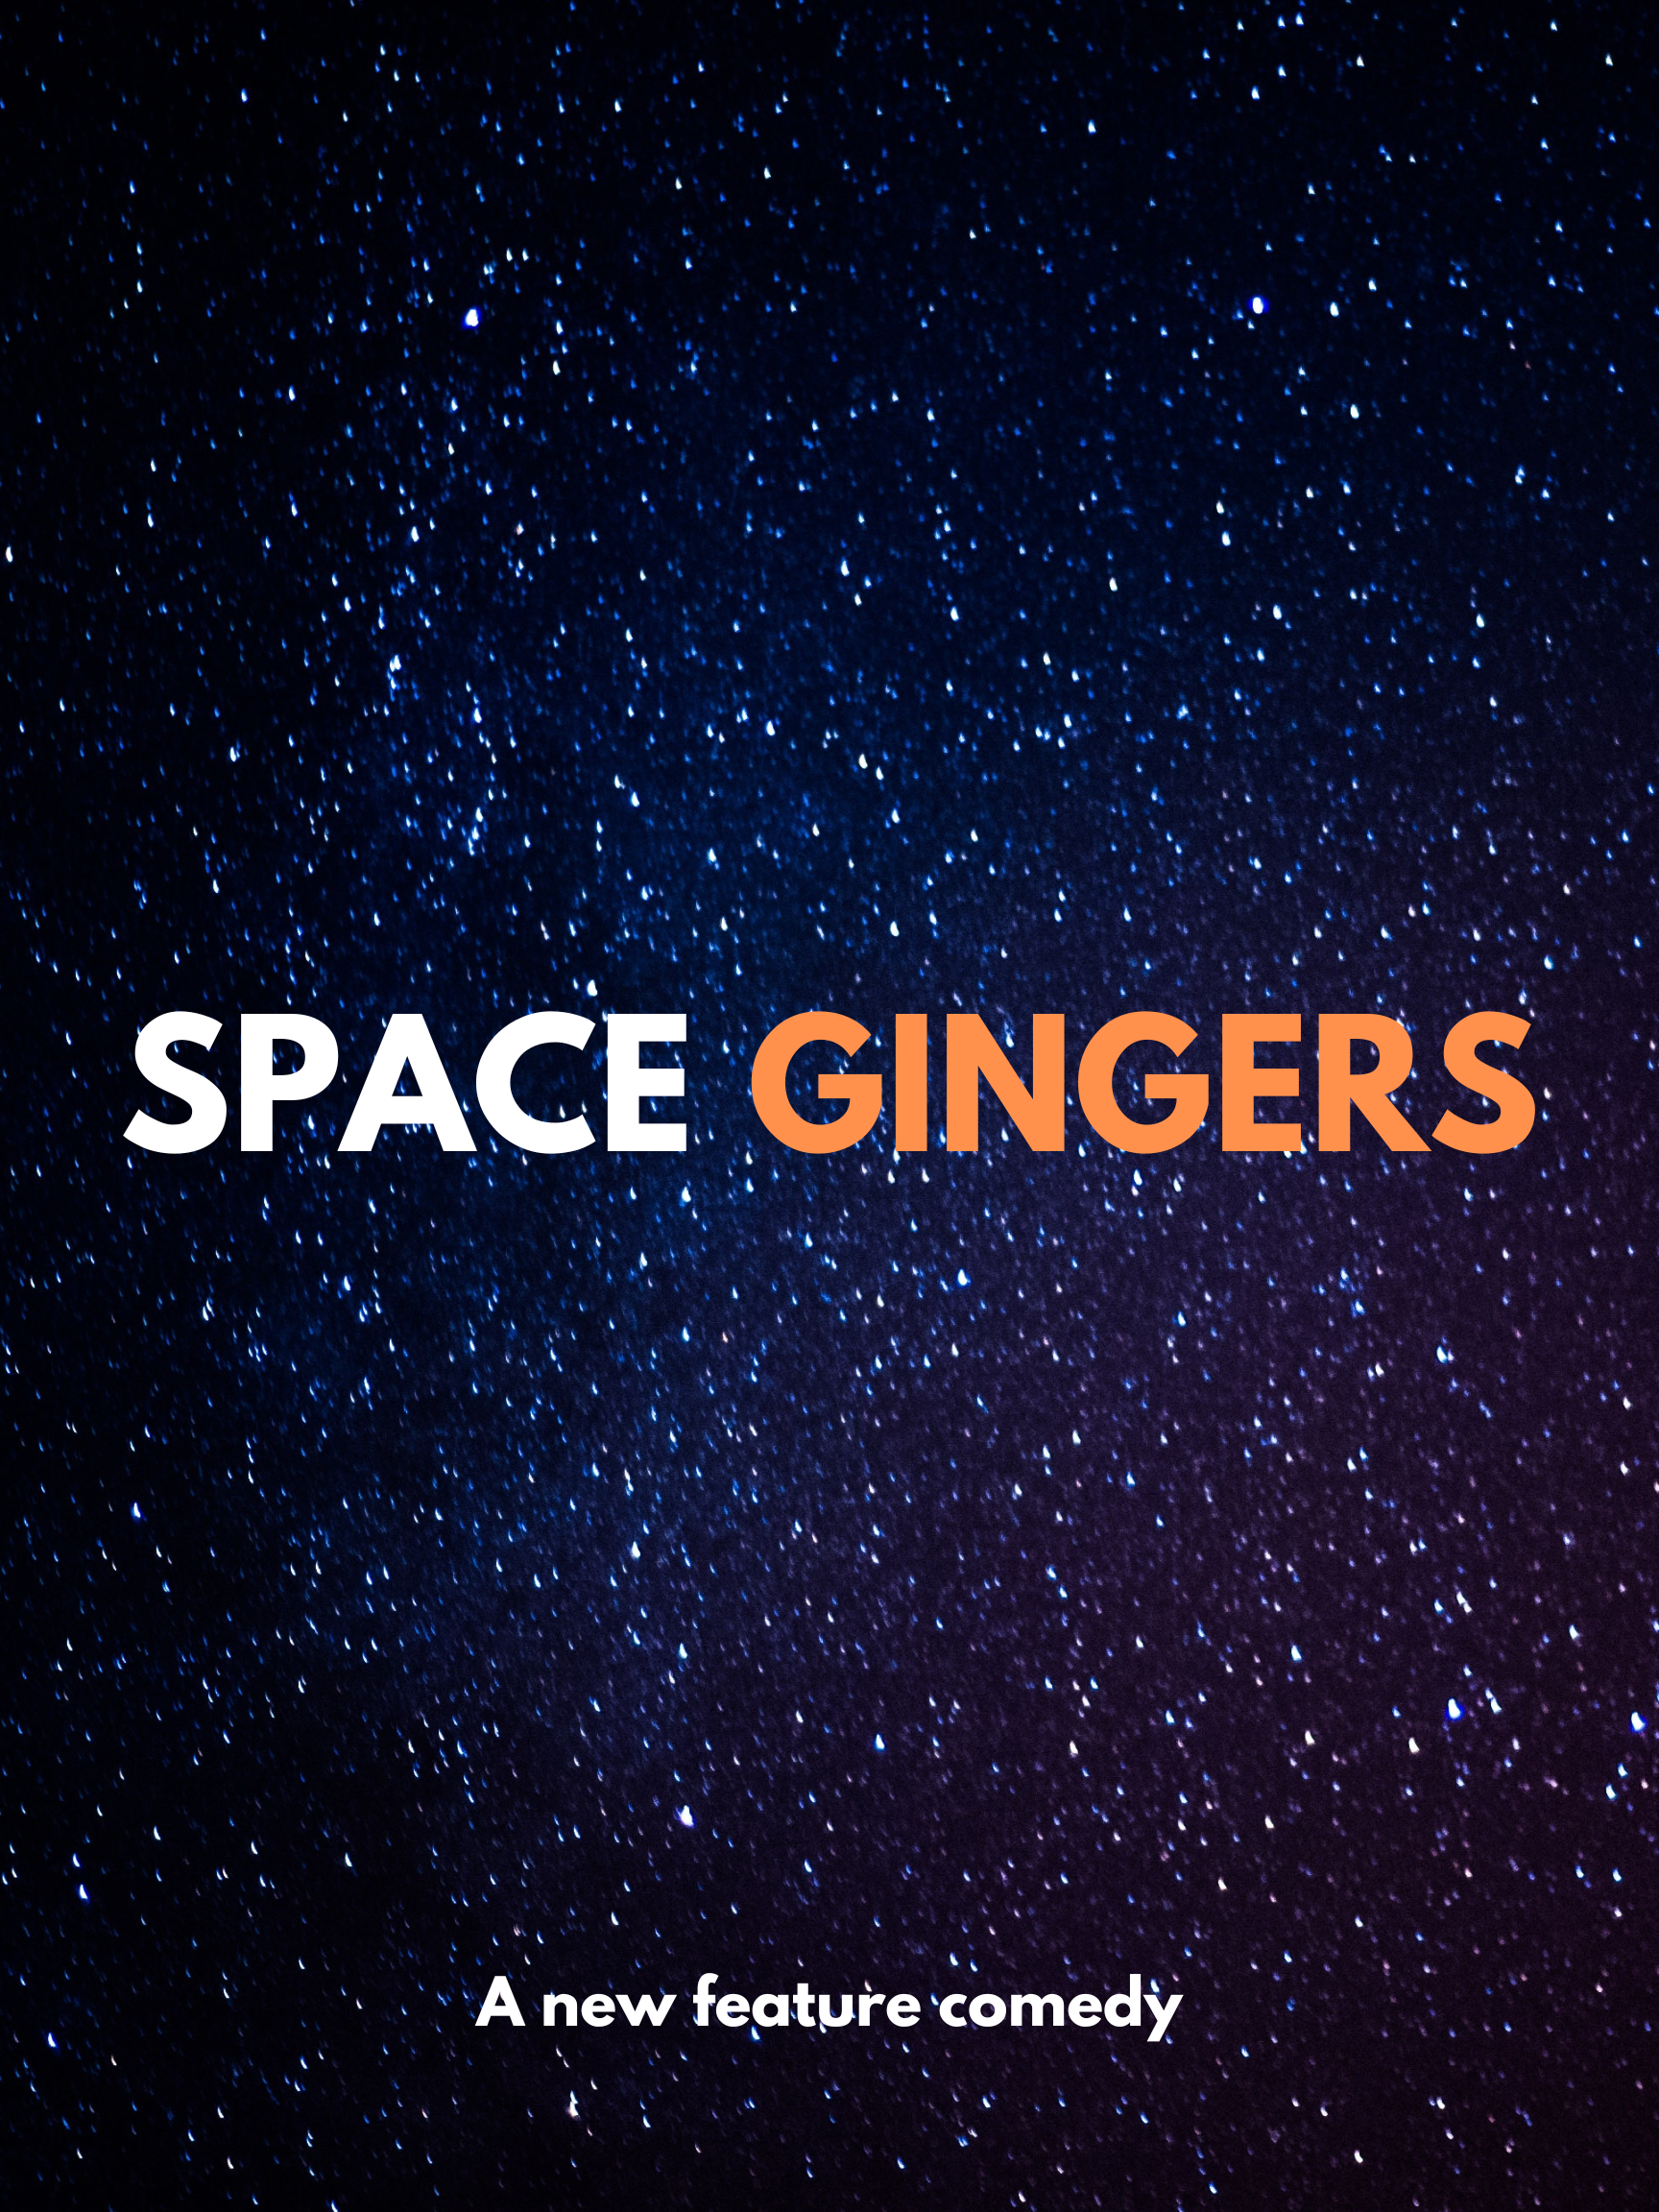 SPACE GINGERS